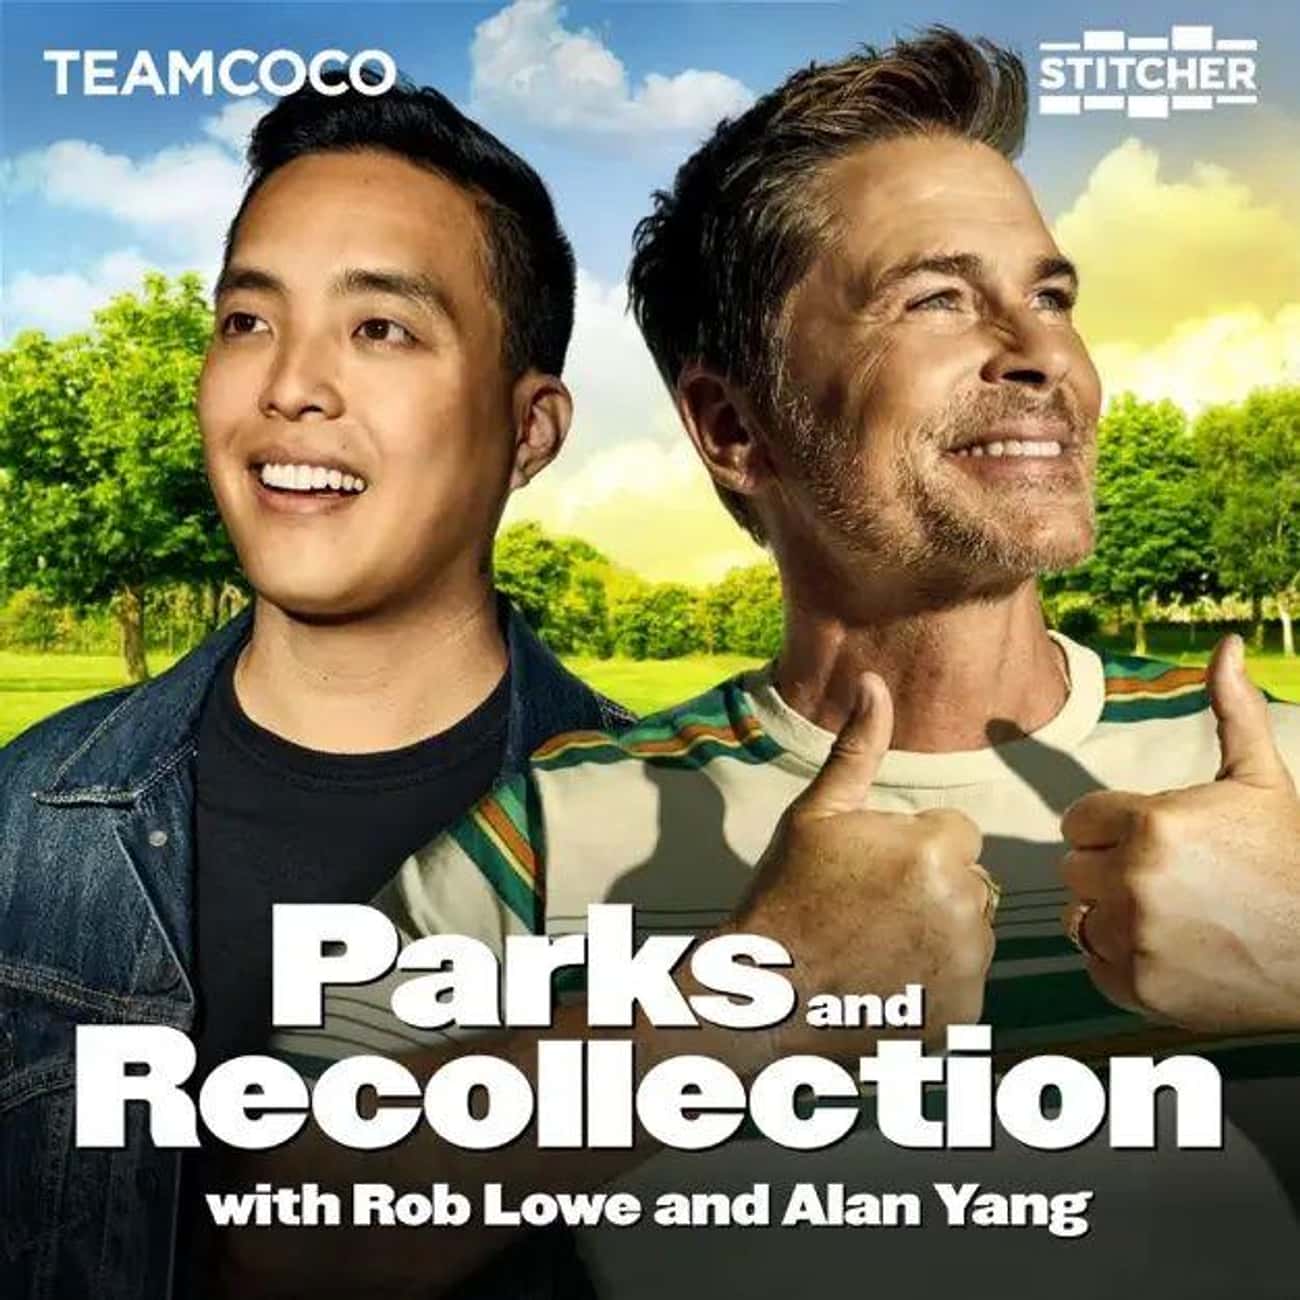 'Parks and Recollection'